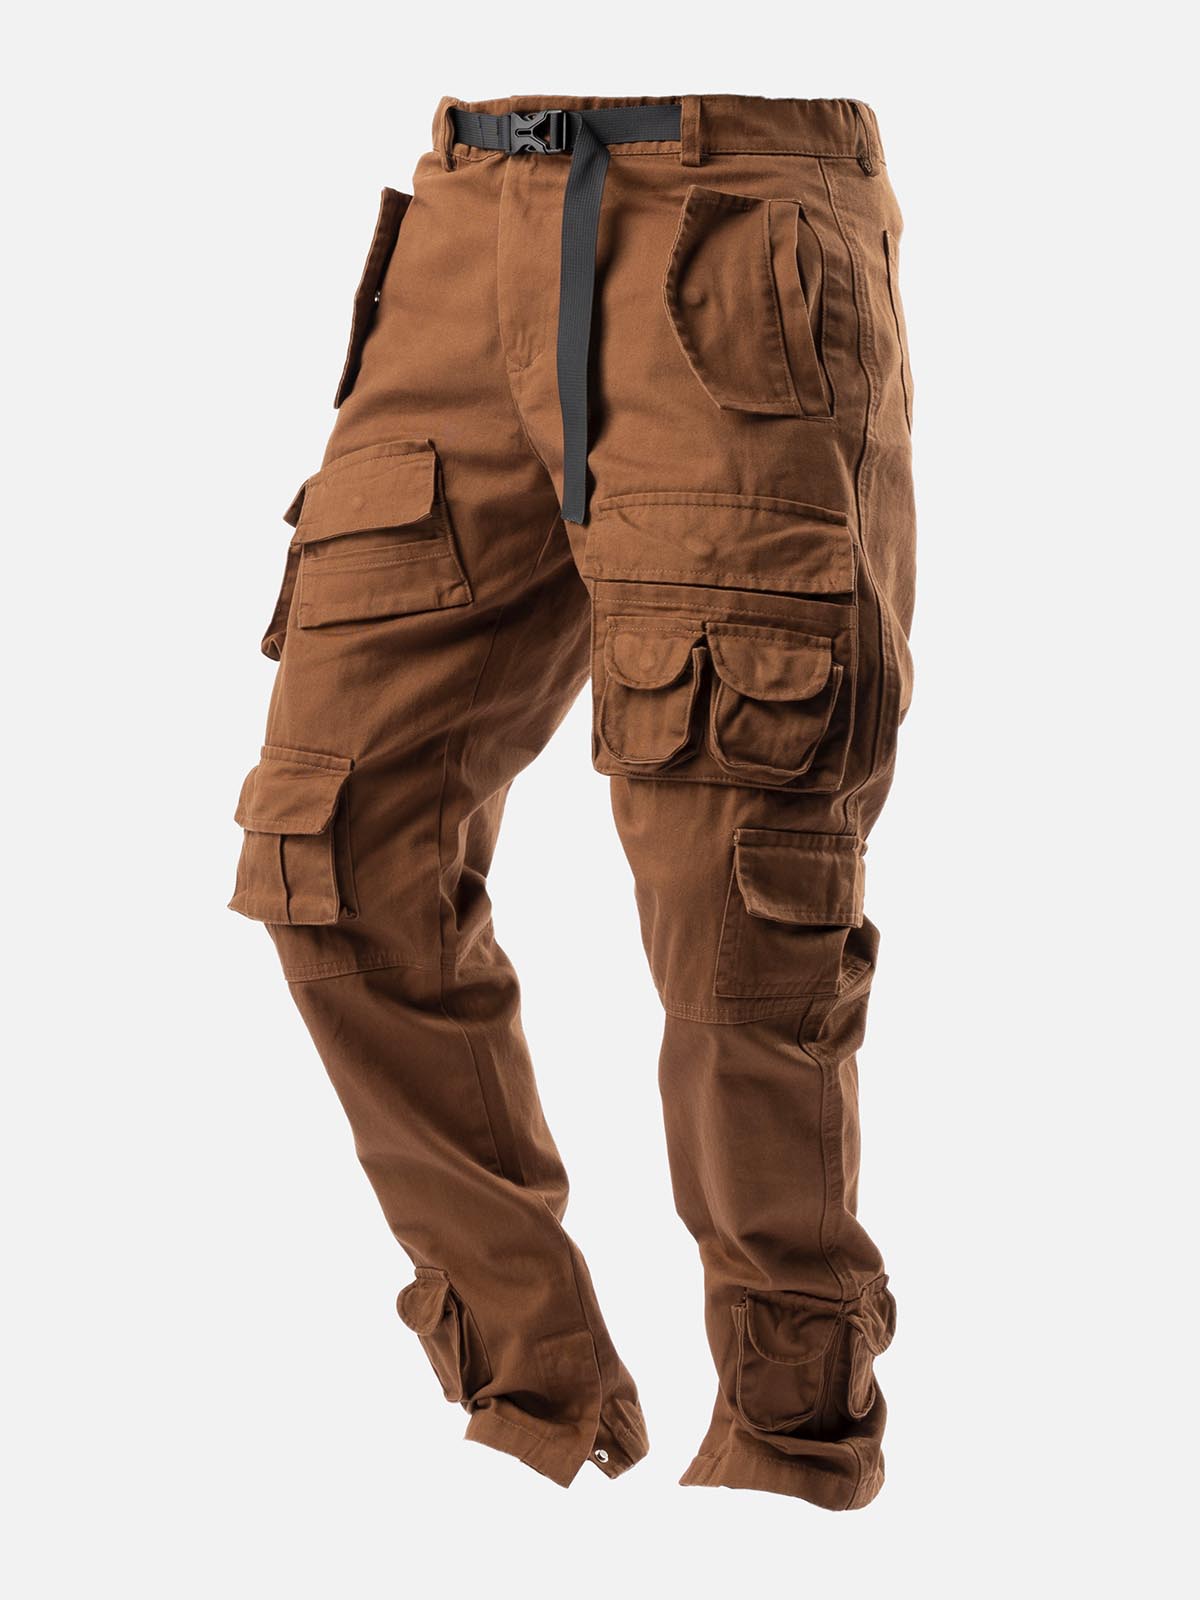 Brown cargo pants 180 cedis Order on 0555162374/0545661775 We deliver  nationwide